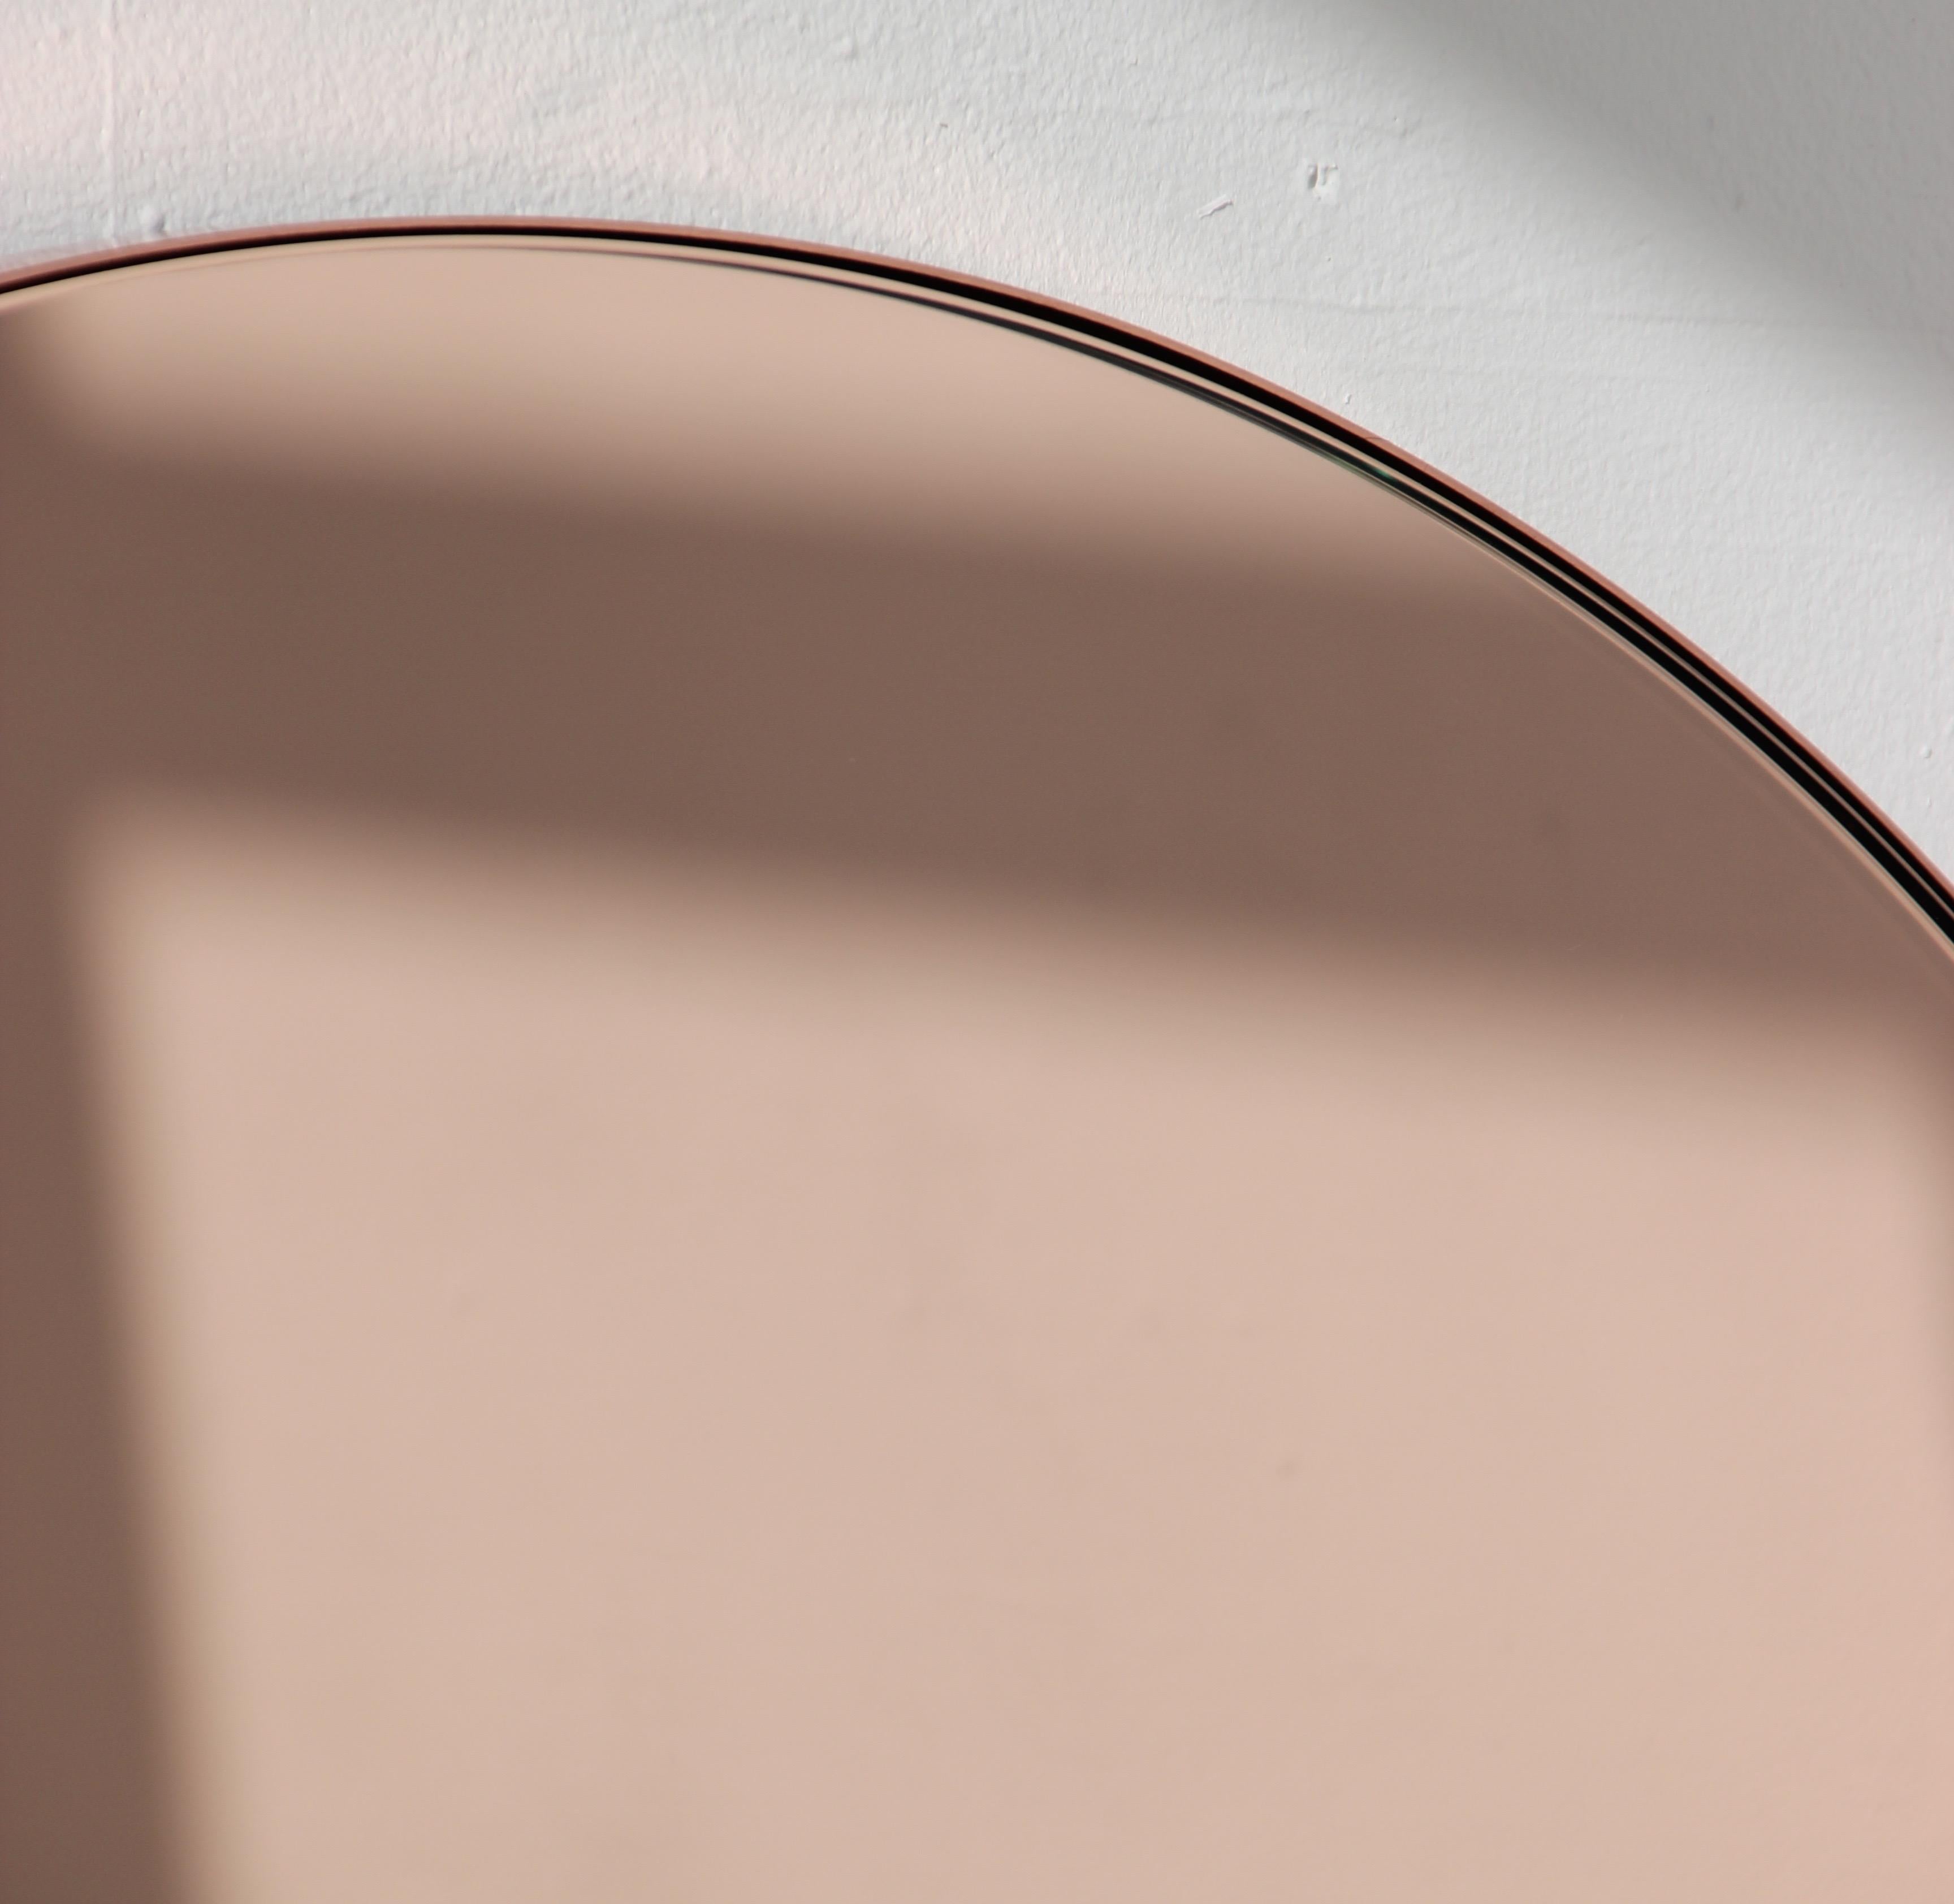 Brushed Orbis™ Rose Gold Tinted Round Contemporary Mirror with Copper Frame - Large